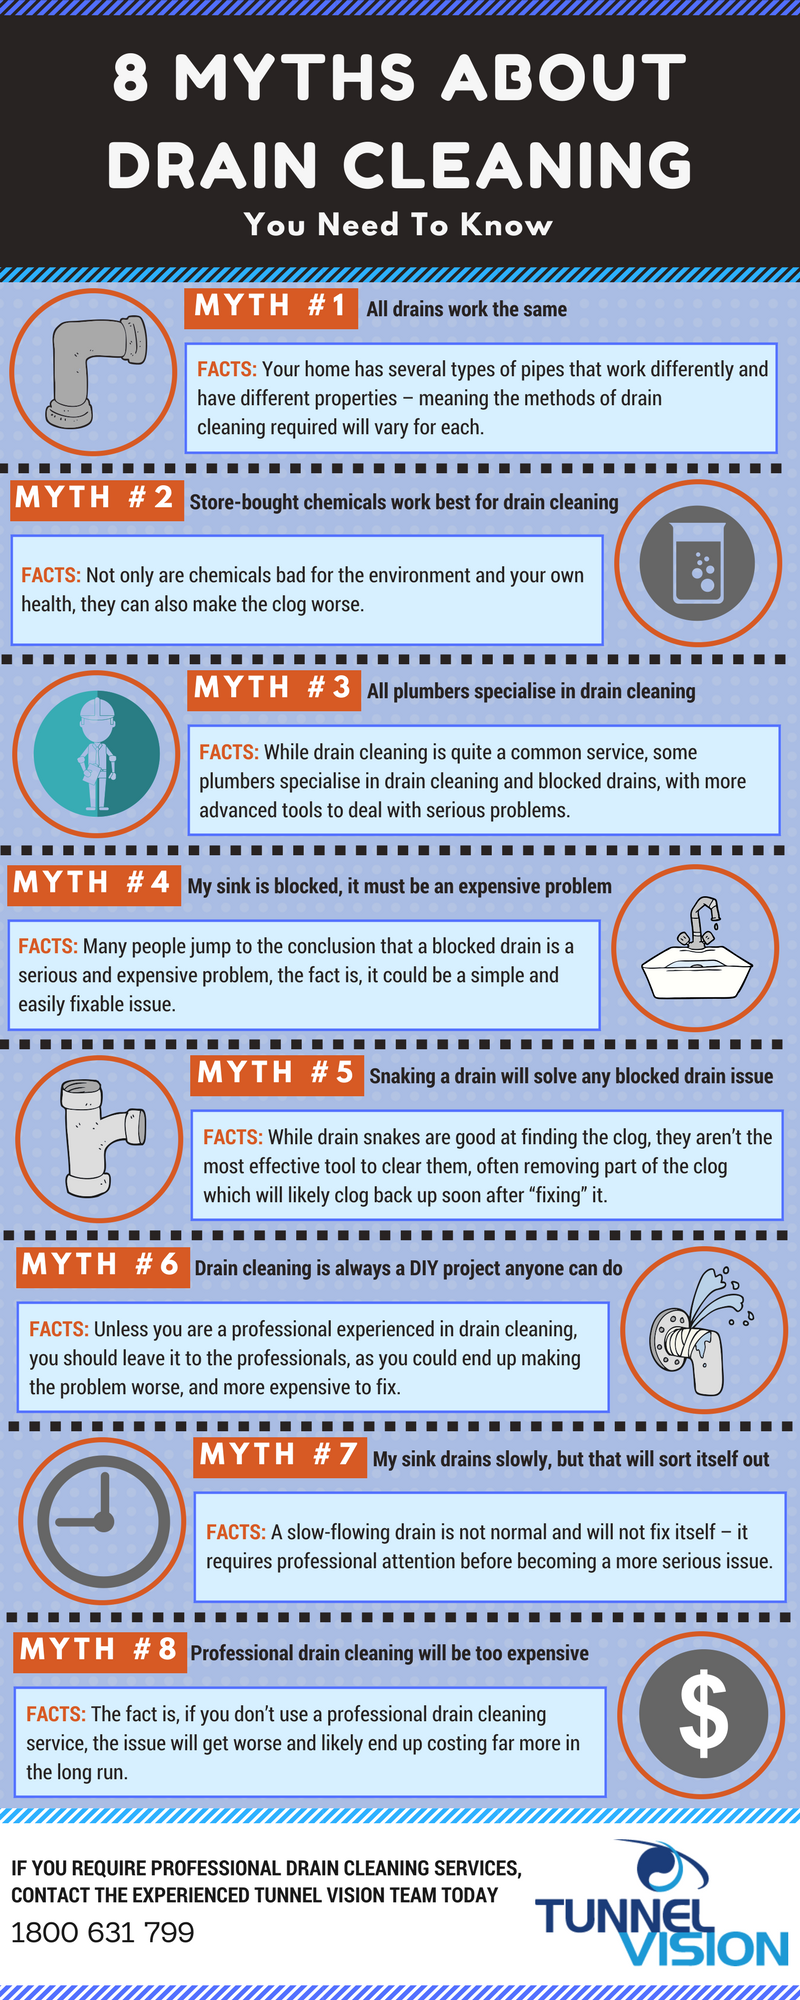 https://www.tunnelvision.com.au/assets/Uploads/8-Myths-About-Drain-Cleaning-You-Need-to-Know.png